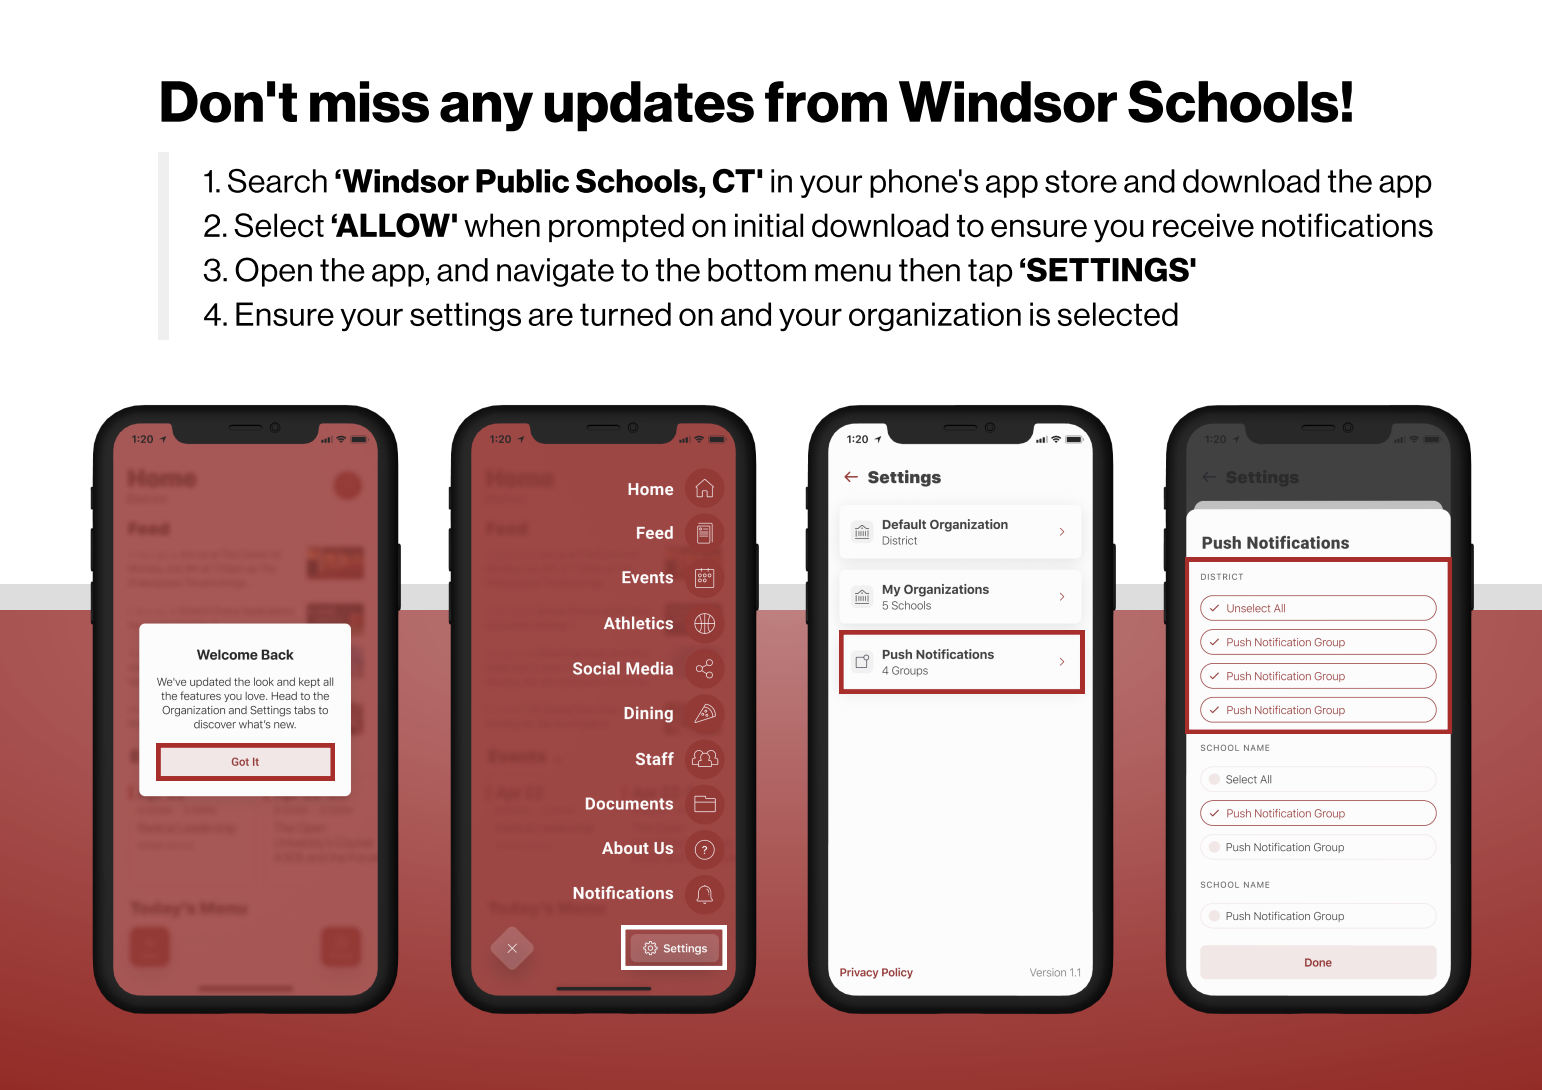 Don't miss any updates from Windsor Schools! 1. Search ‘Windsor Public Schools, CT' in your phone's app store and download the app 2. Select ‘ALLOW' when prompted on initial download to ensure you receive notifications 3. Open the app, and navigate to the bottom menu then tap ‘SETTINGS' 4. Ensure your settings are turned on and your organization is selected